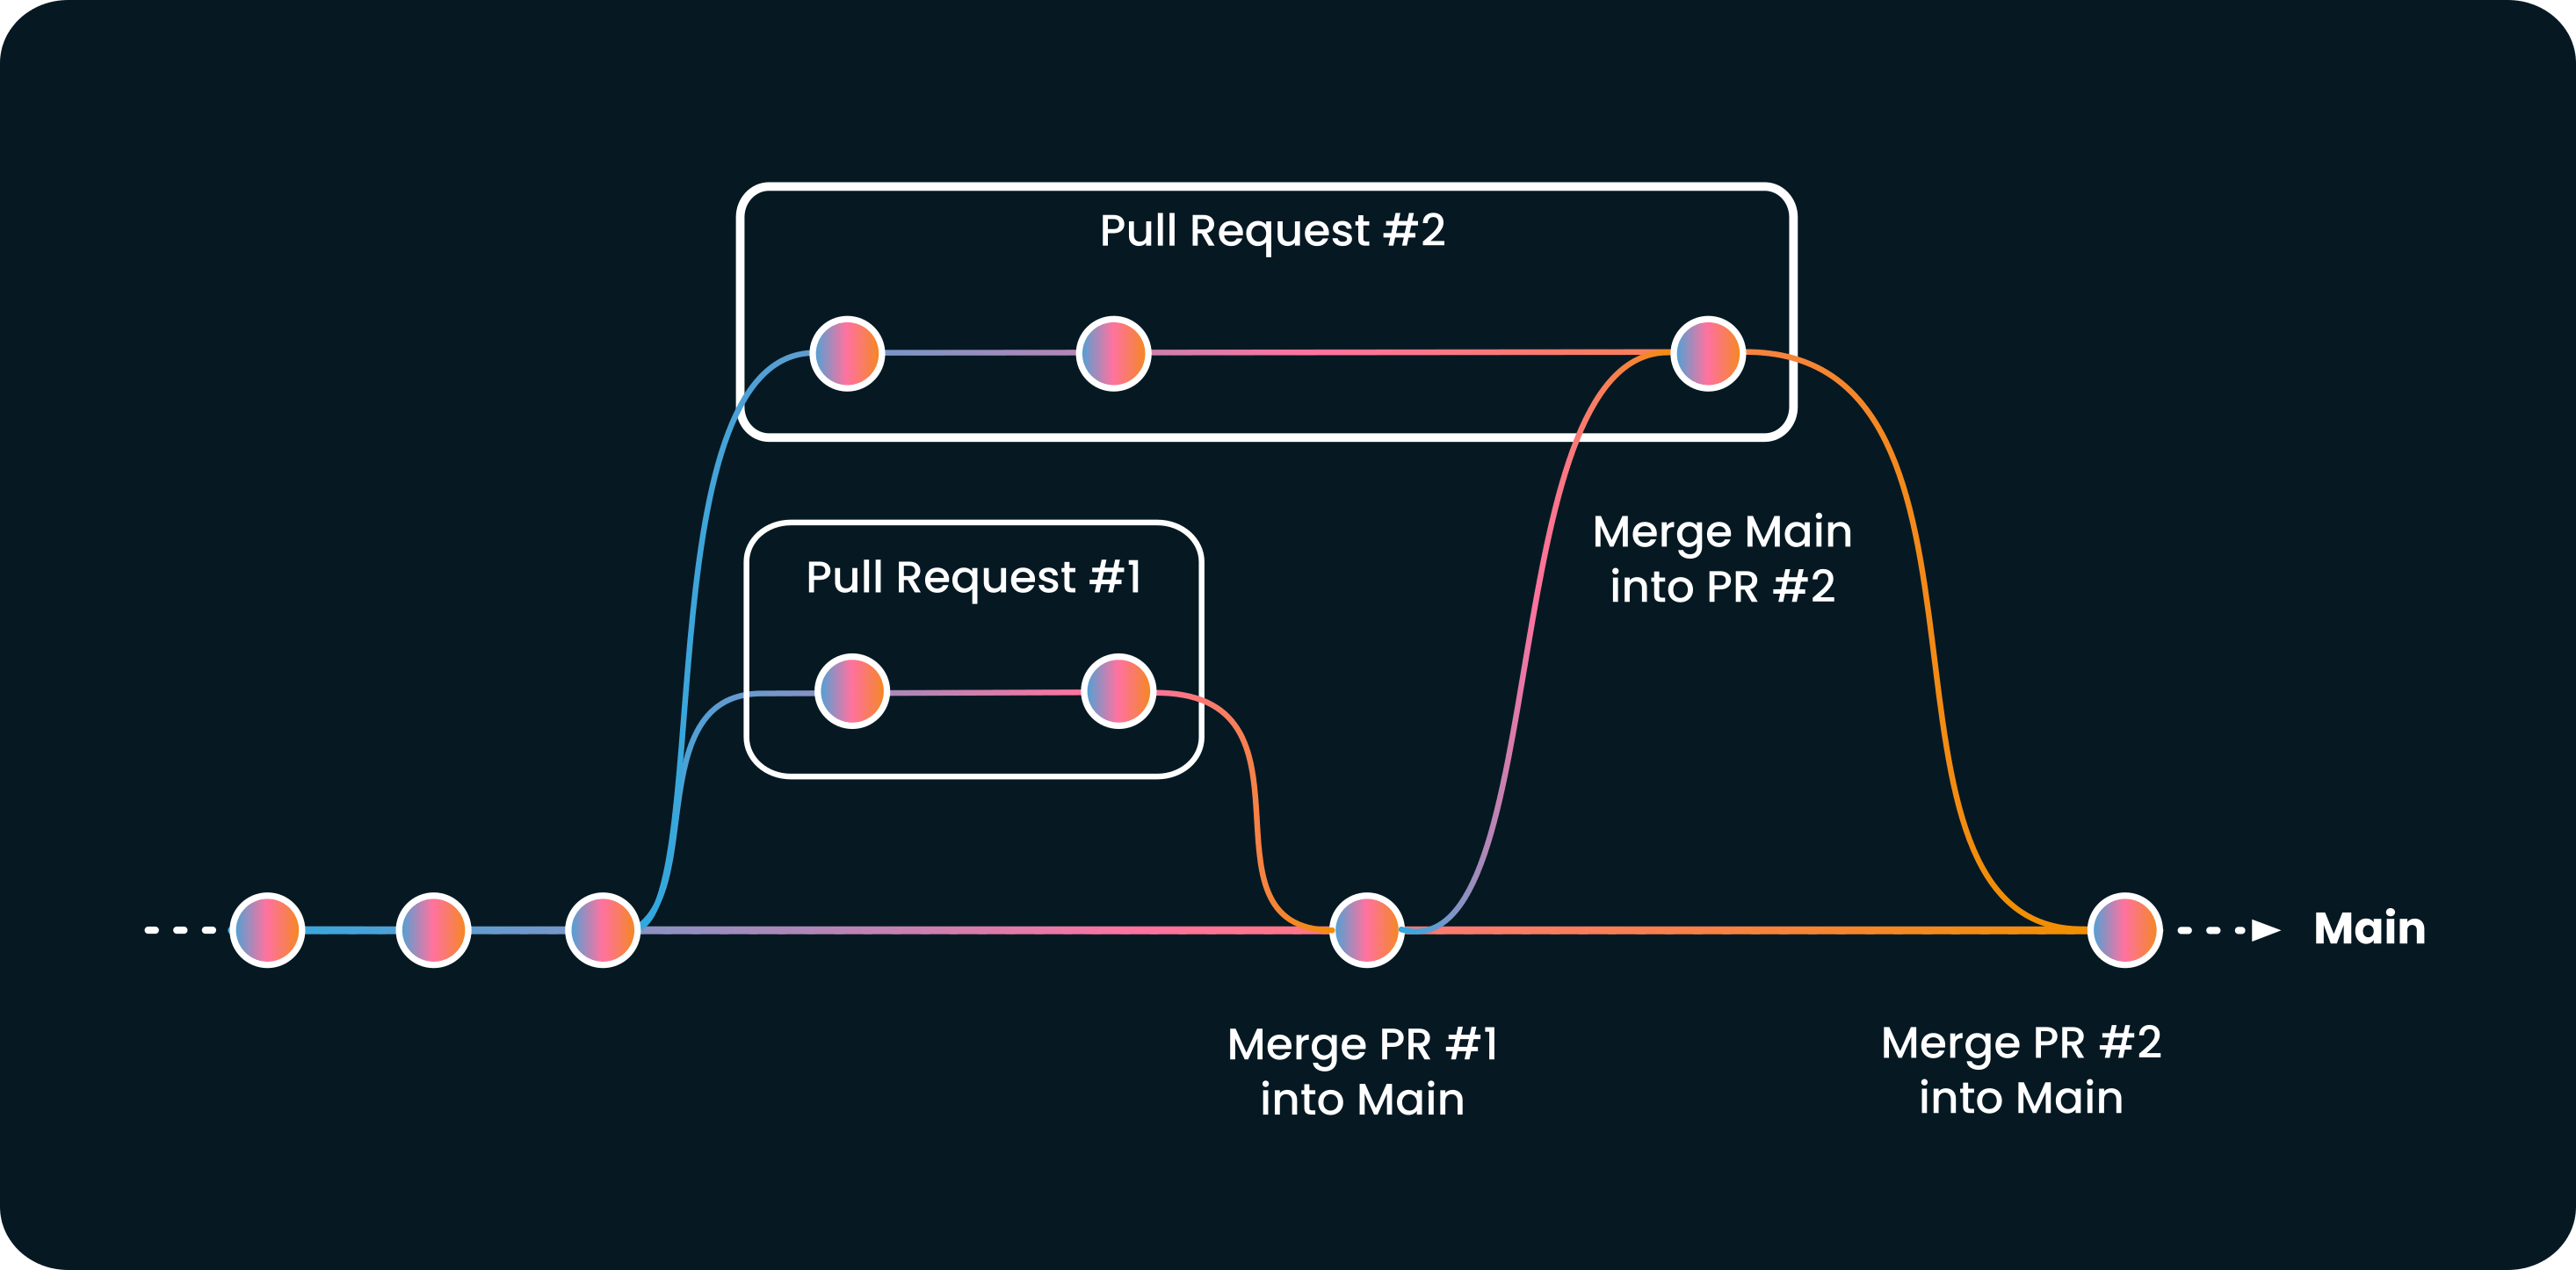 To merge the last outdated pull request, the merge queue merge again the main branch into the feature branch